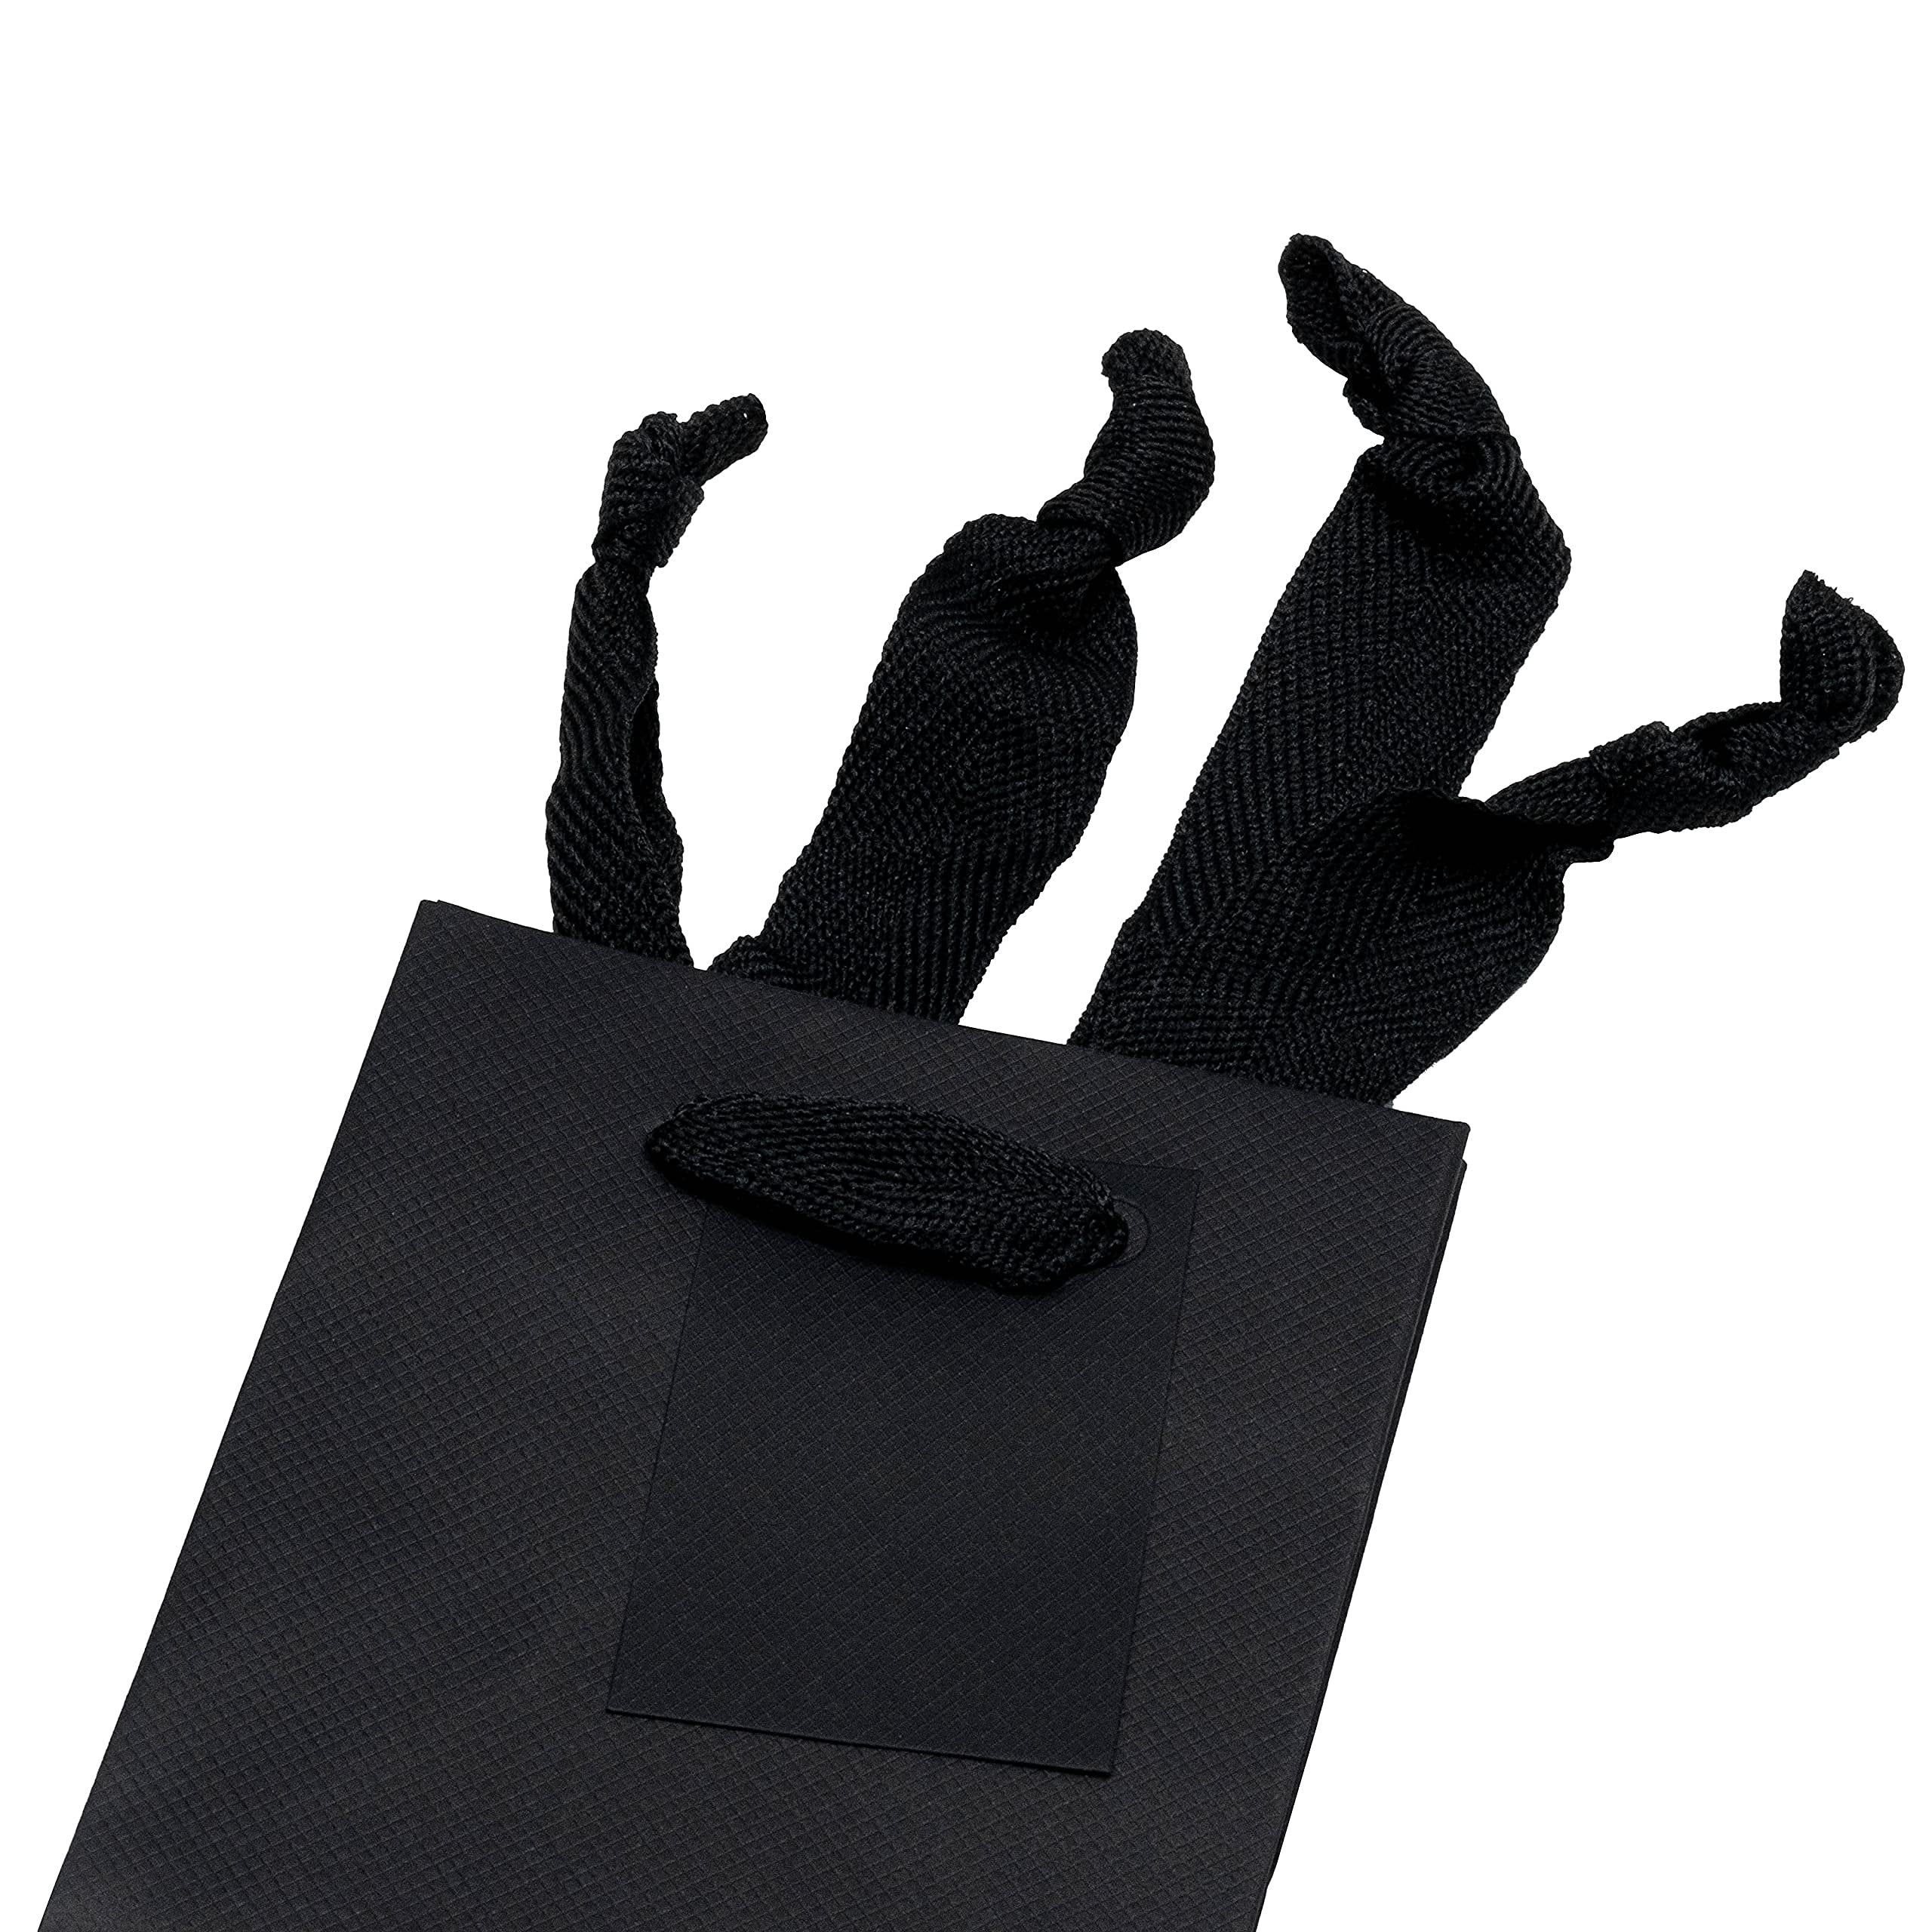 Black Gift Bags - 4x2.75x4.5 Inch 12 Pack Extra Small Black Paper Gift Bags with Handles, Designer Gift Wrap for Little Presents, Tiny Shopping Bags for Birthday Parties, Events, Holidays, Bulk